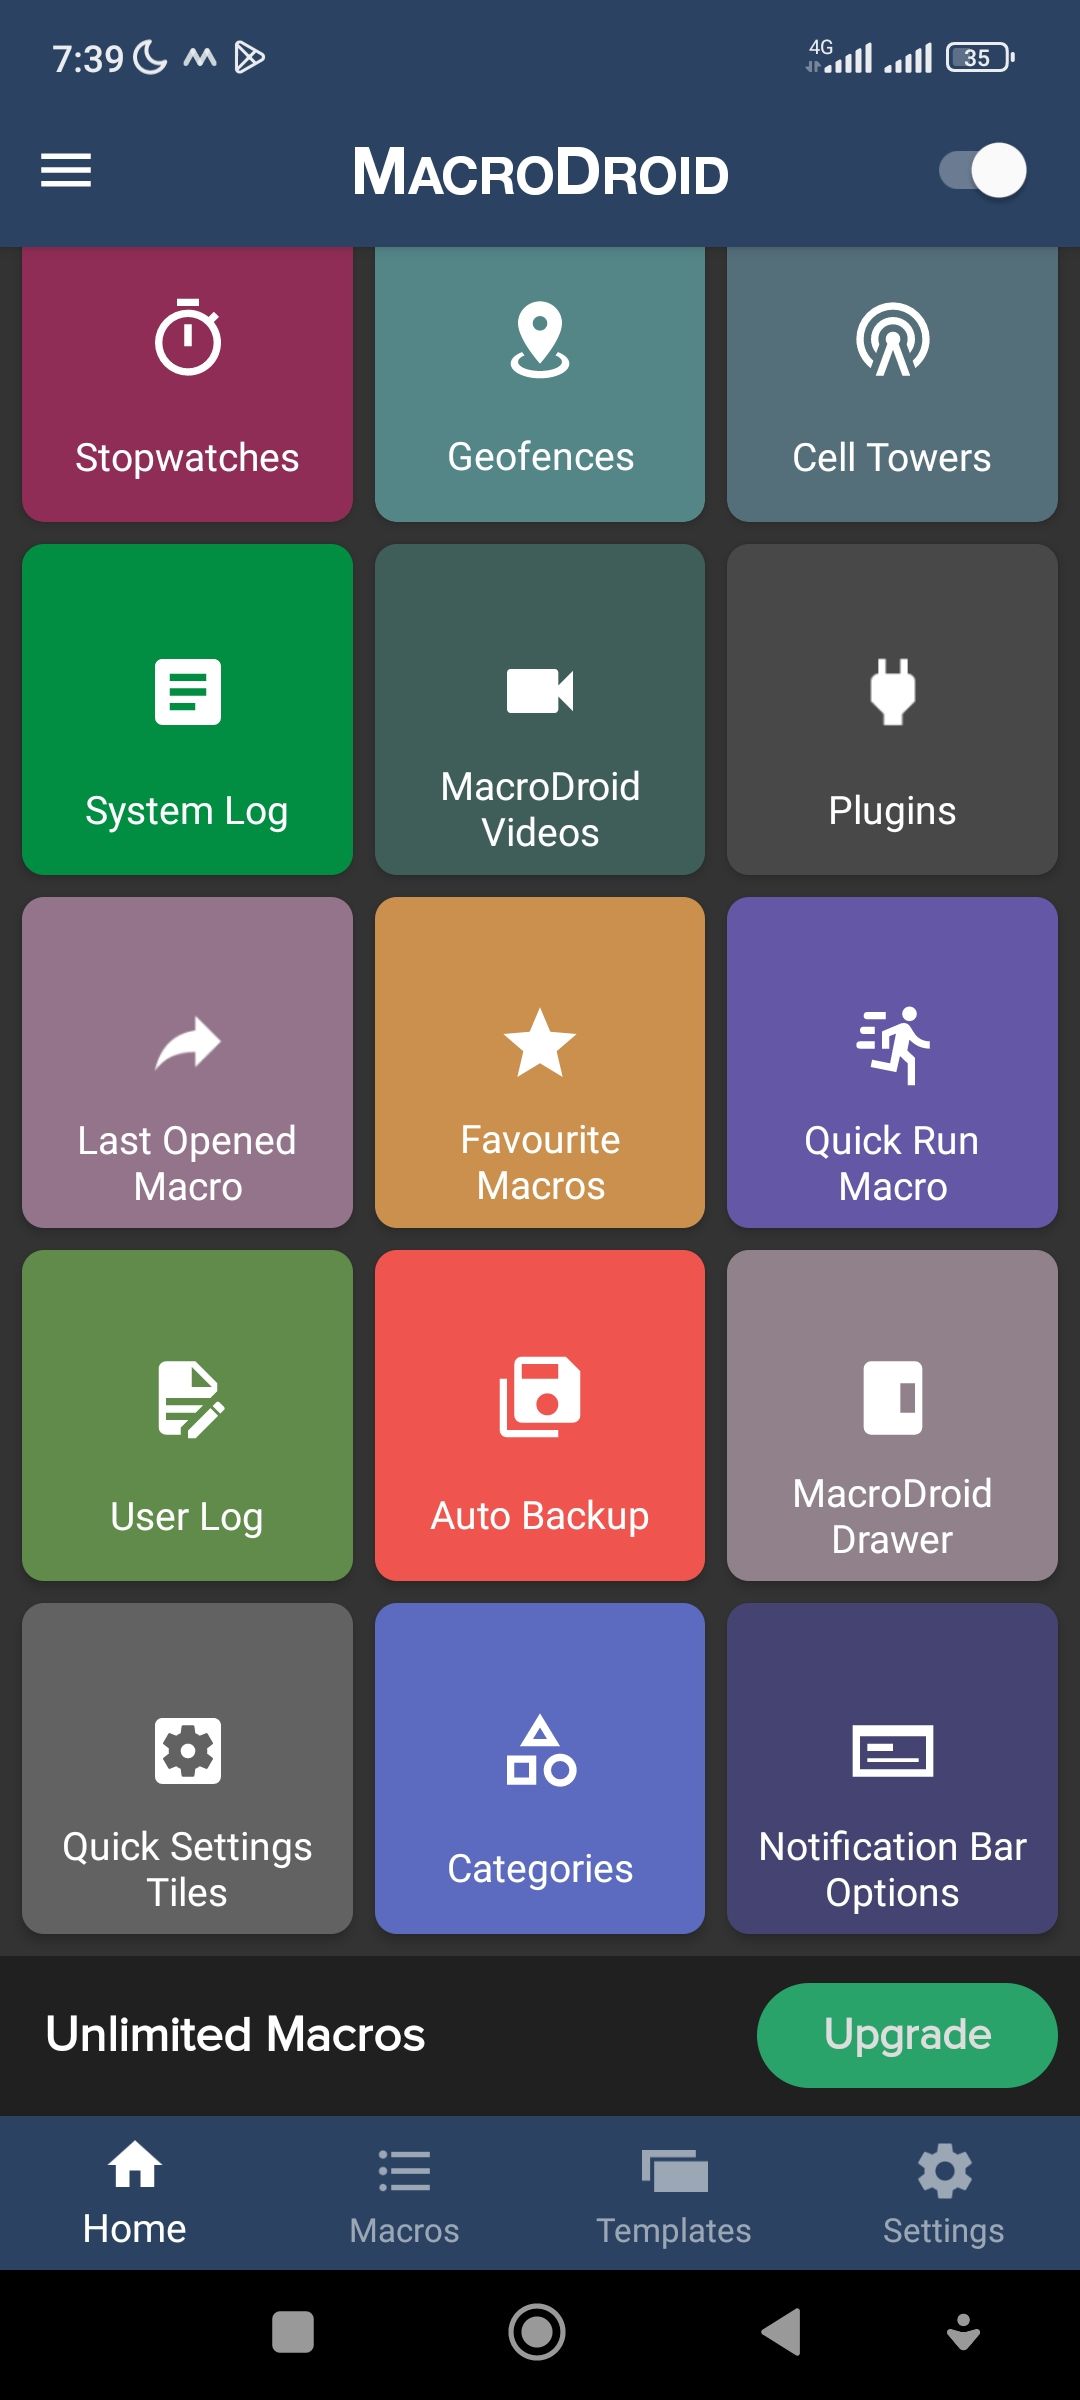 Quick settings tiles option on MacroDroid home screen